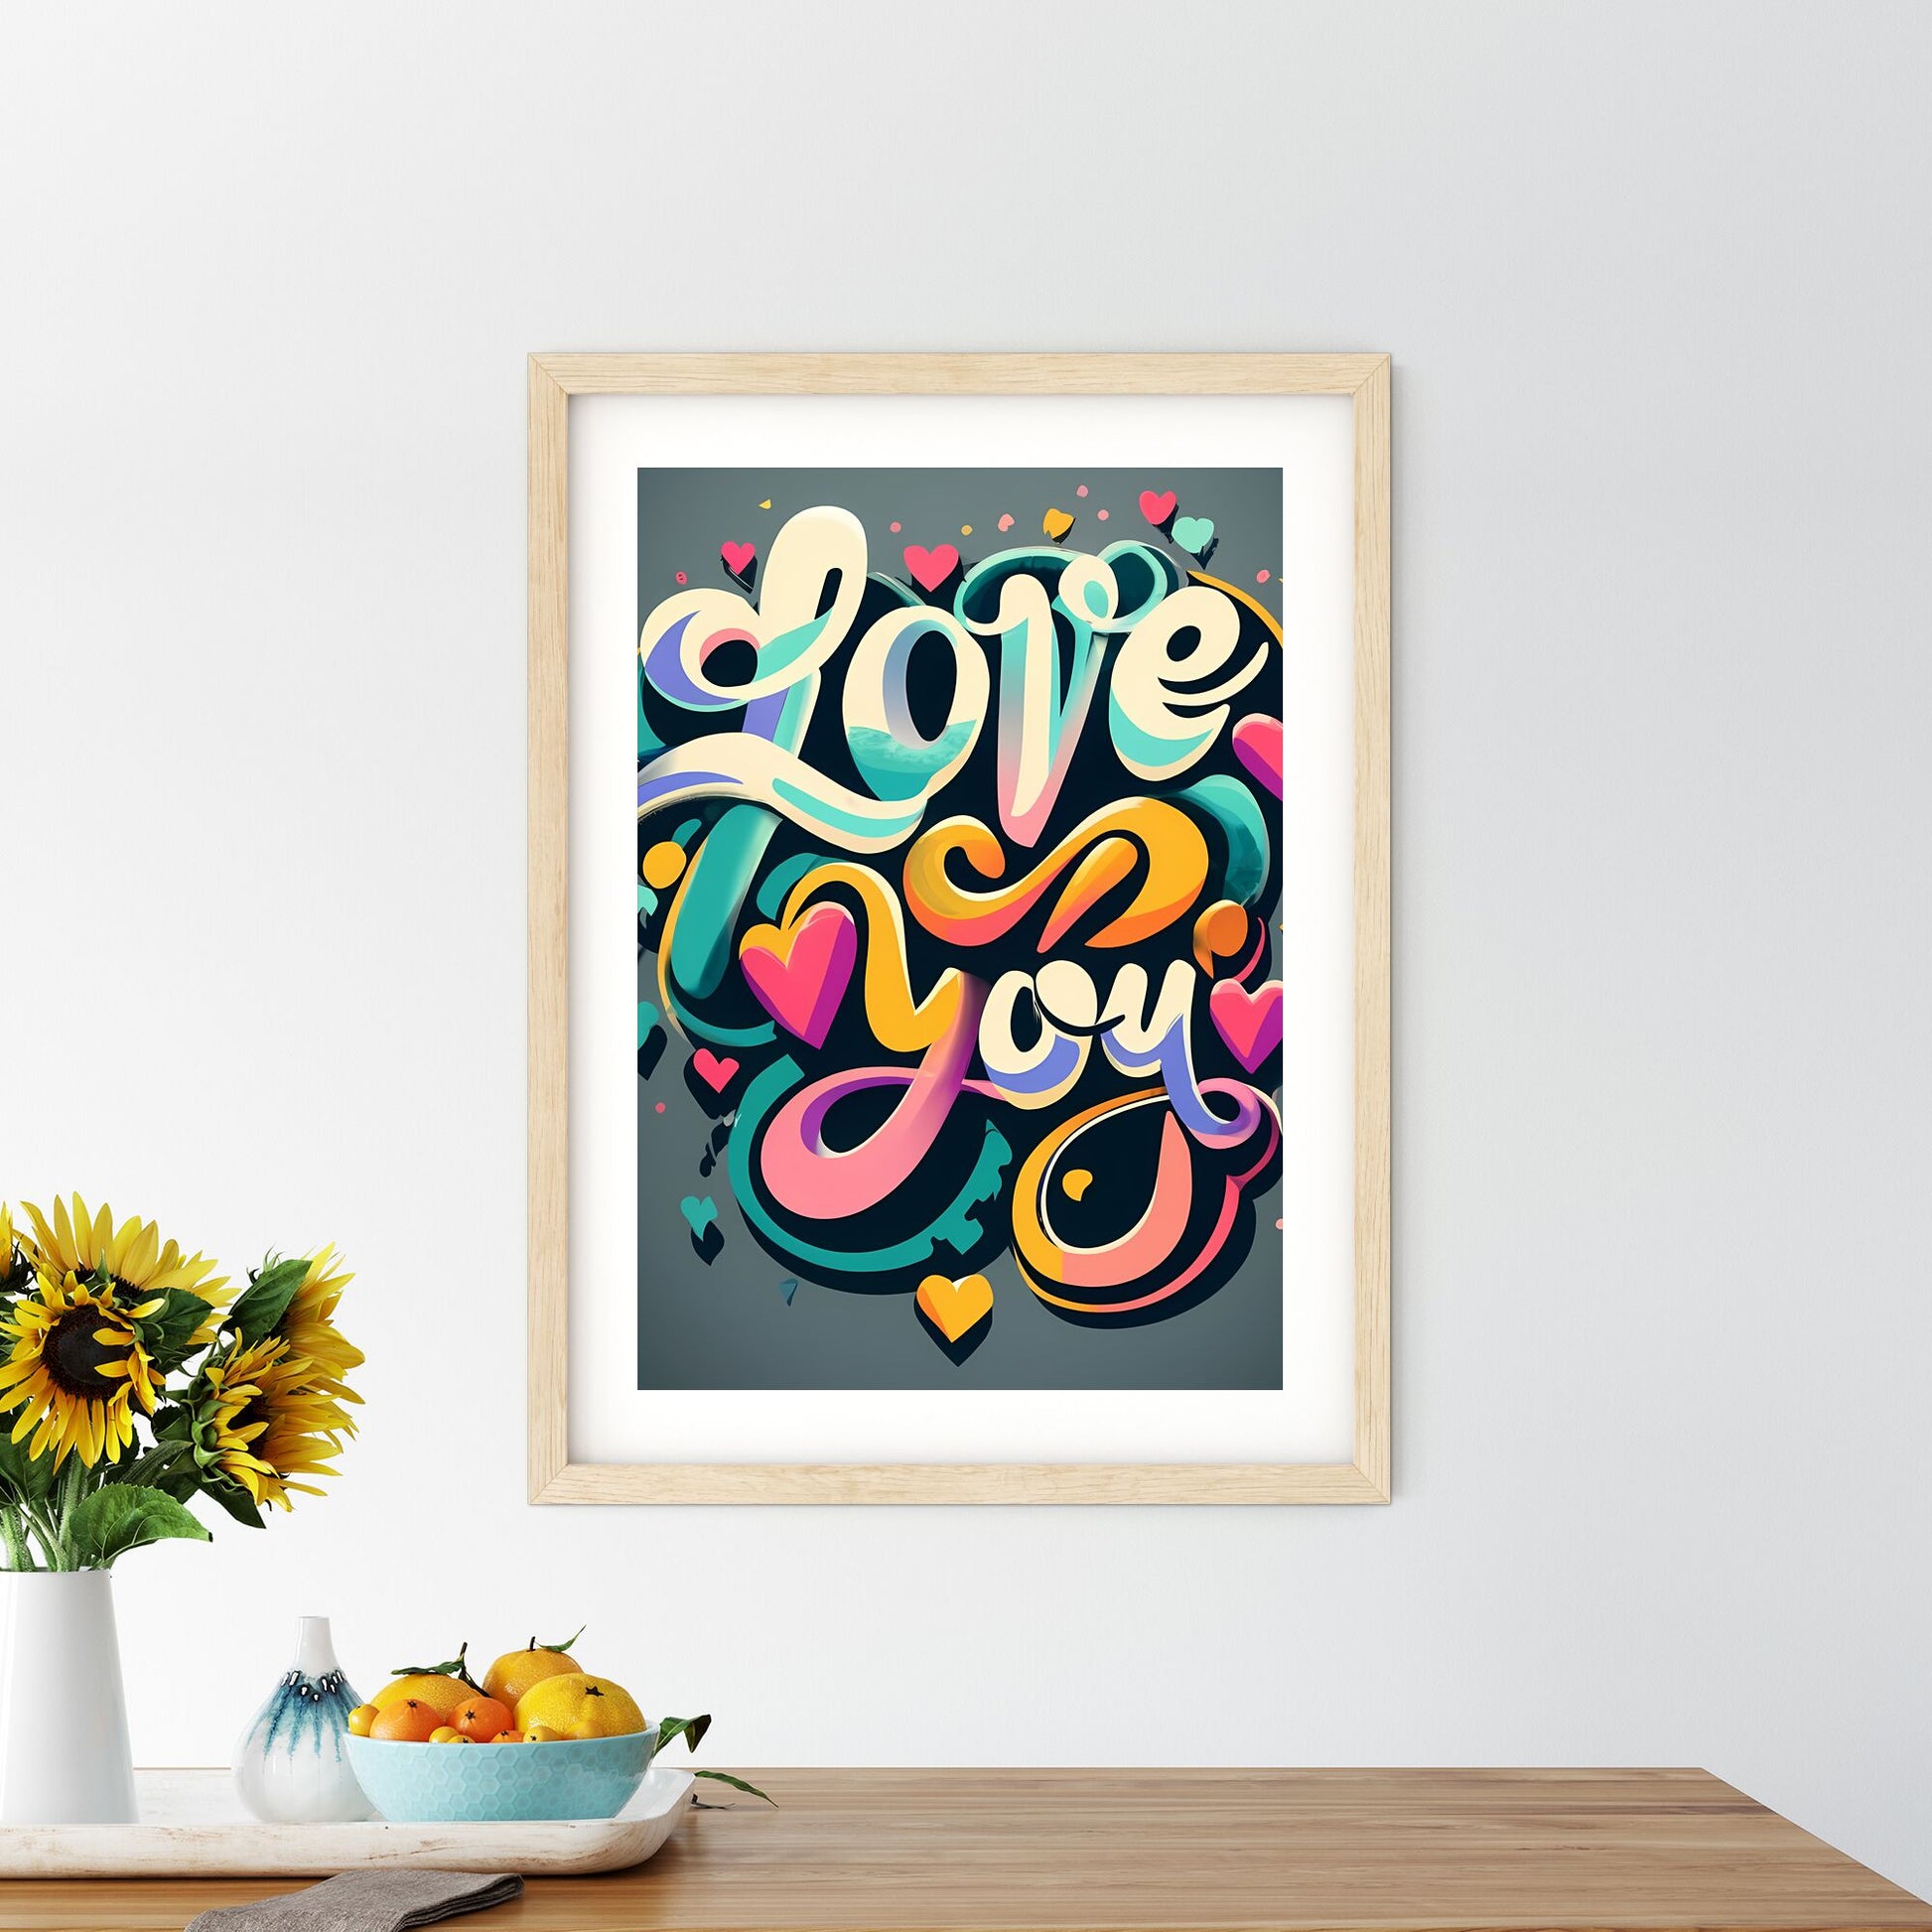 Love You - A Colorful Text With Hearts Art Print Default Title